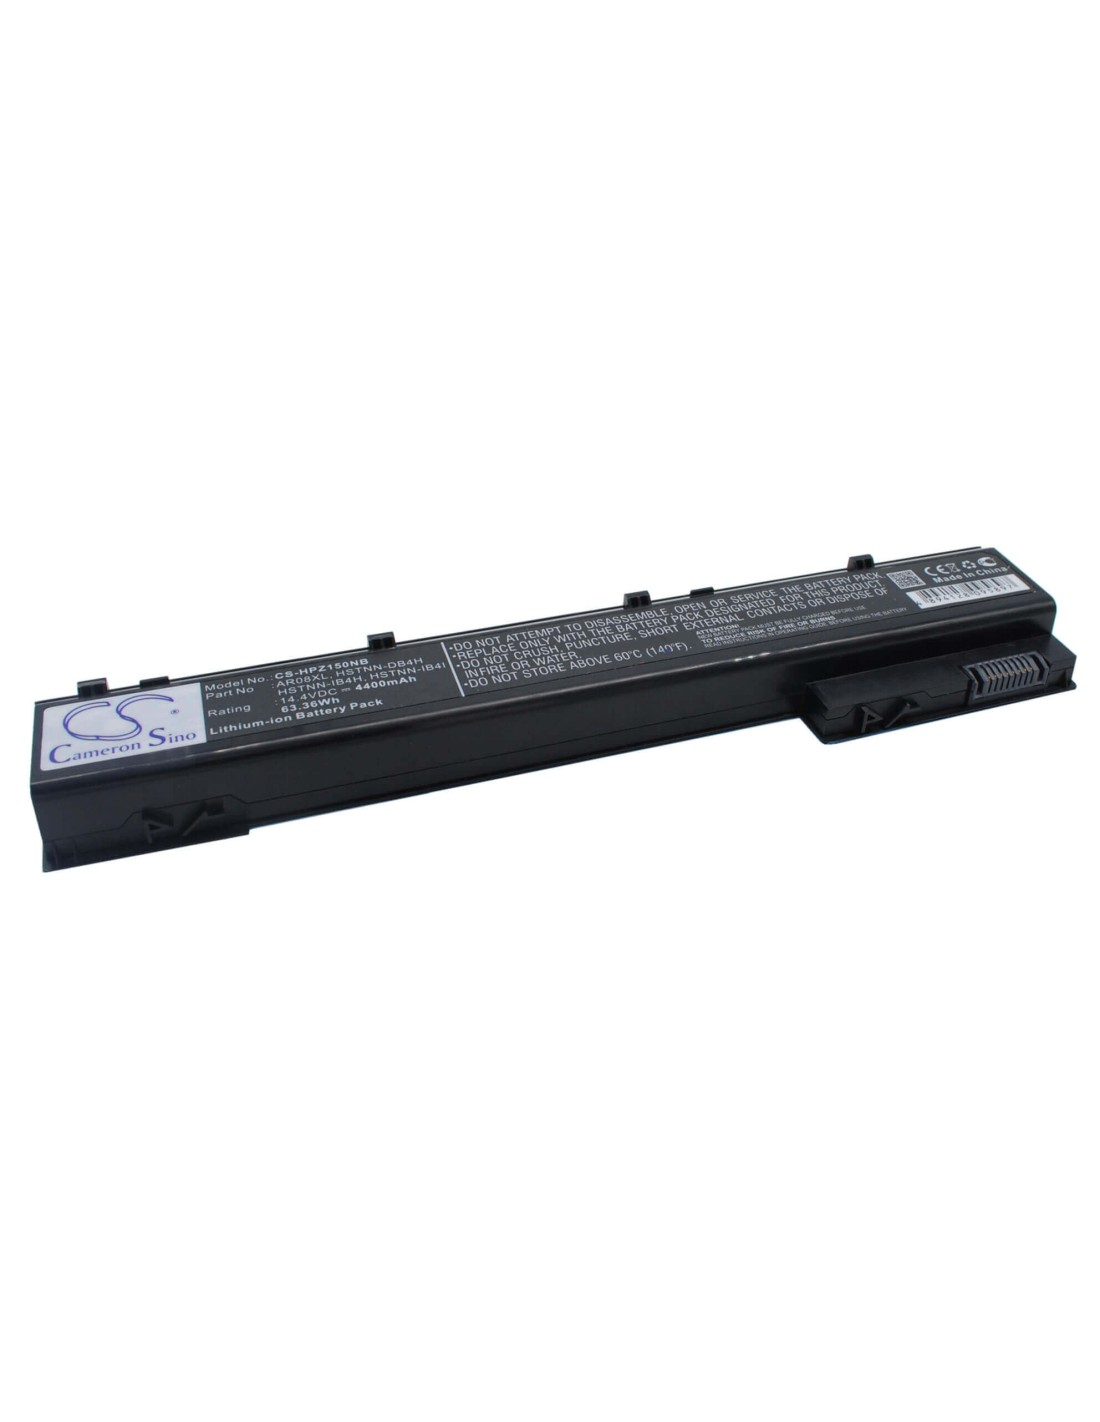 Black Battery for HP ZBook 15, ZBook 17, ZBook 729BJC321015 14.4V, 4400mAh - 63.36Wh